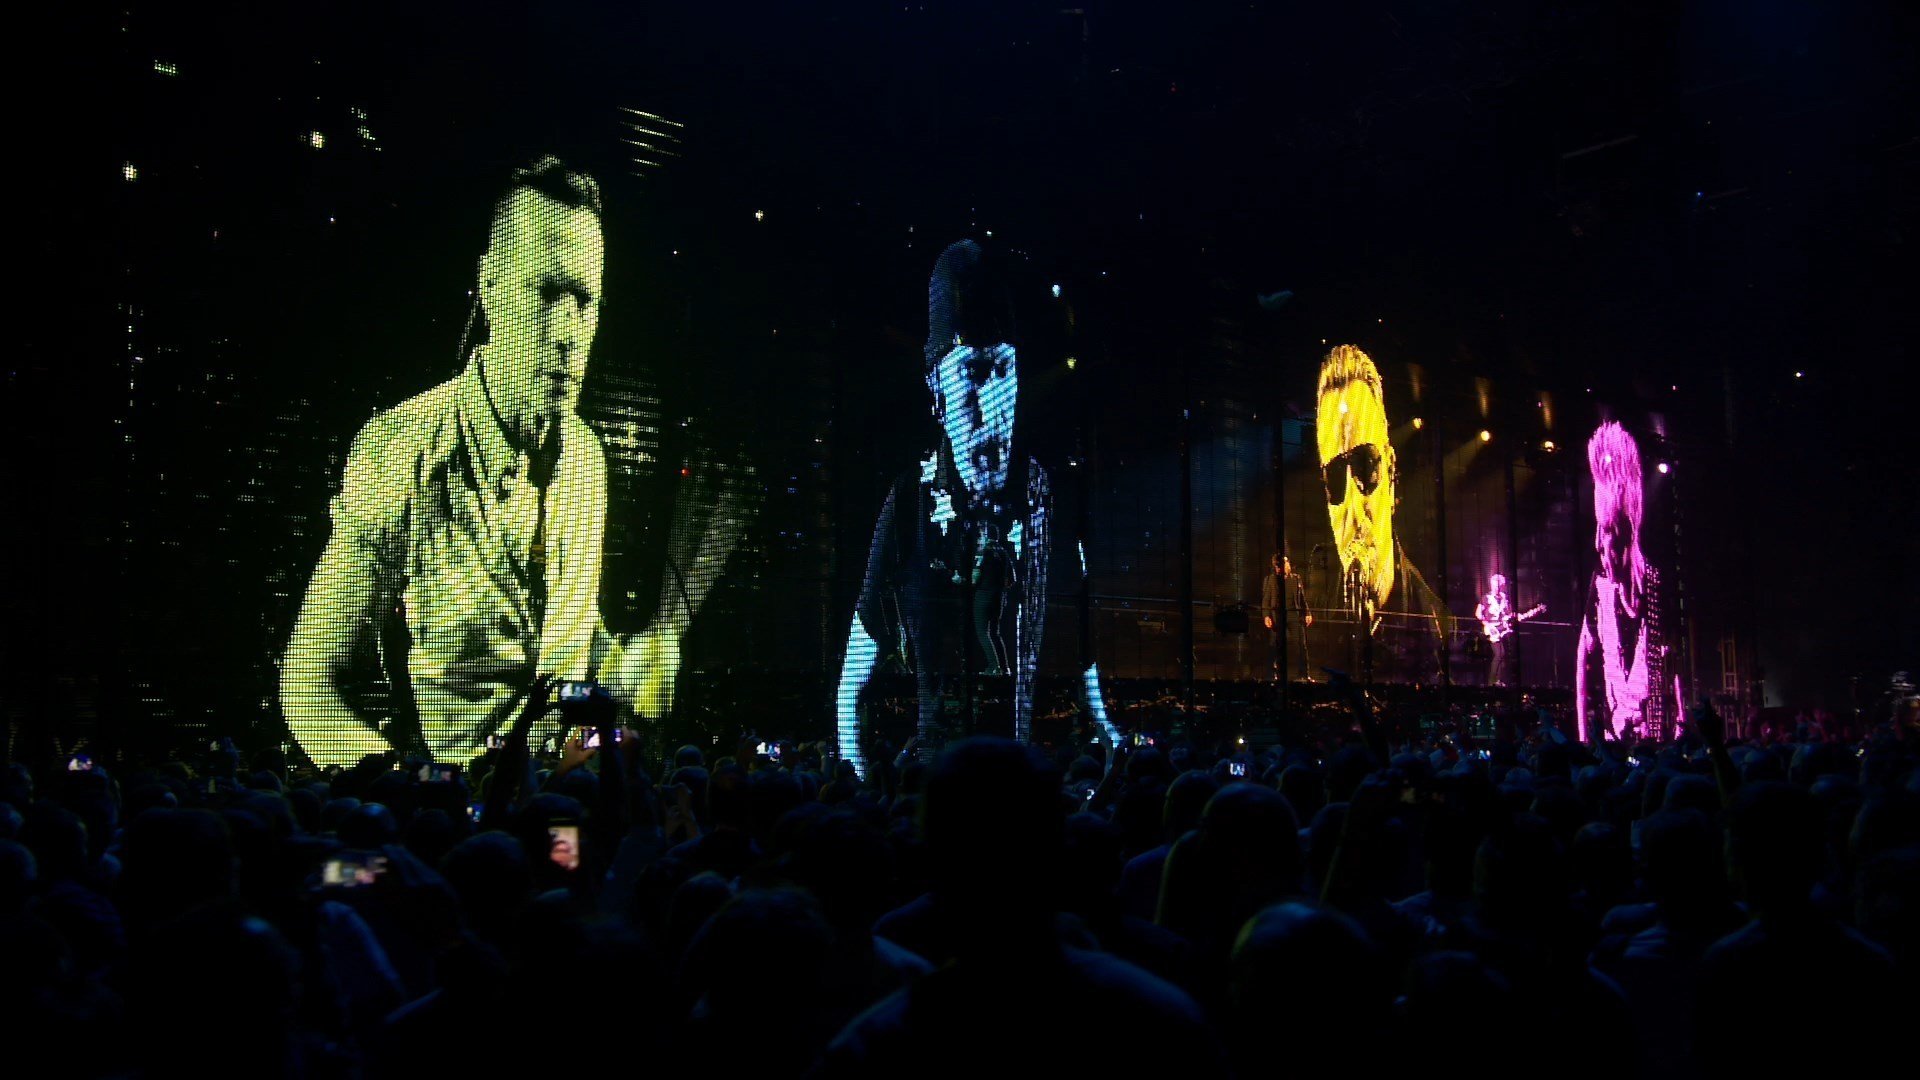 u2 wallpaper hd,performance,entertainment,performing arts,concert,stage